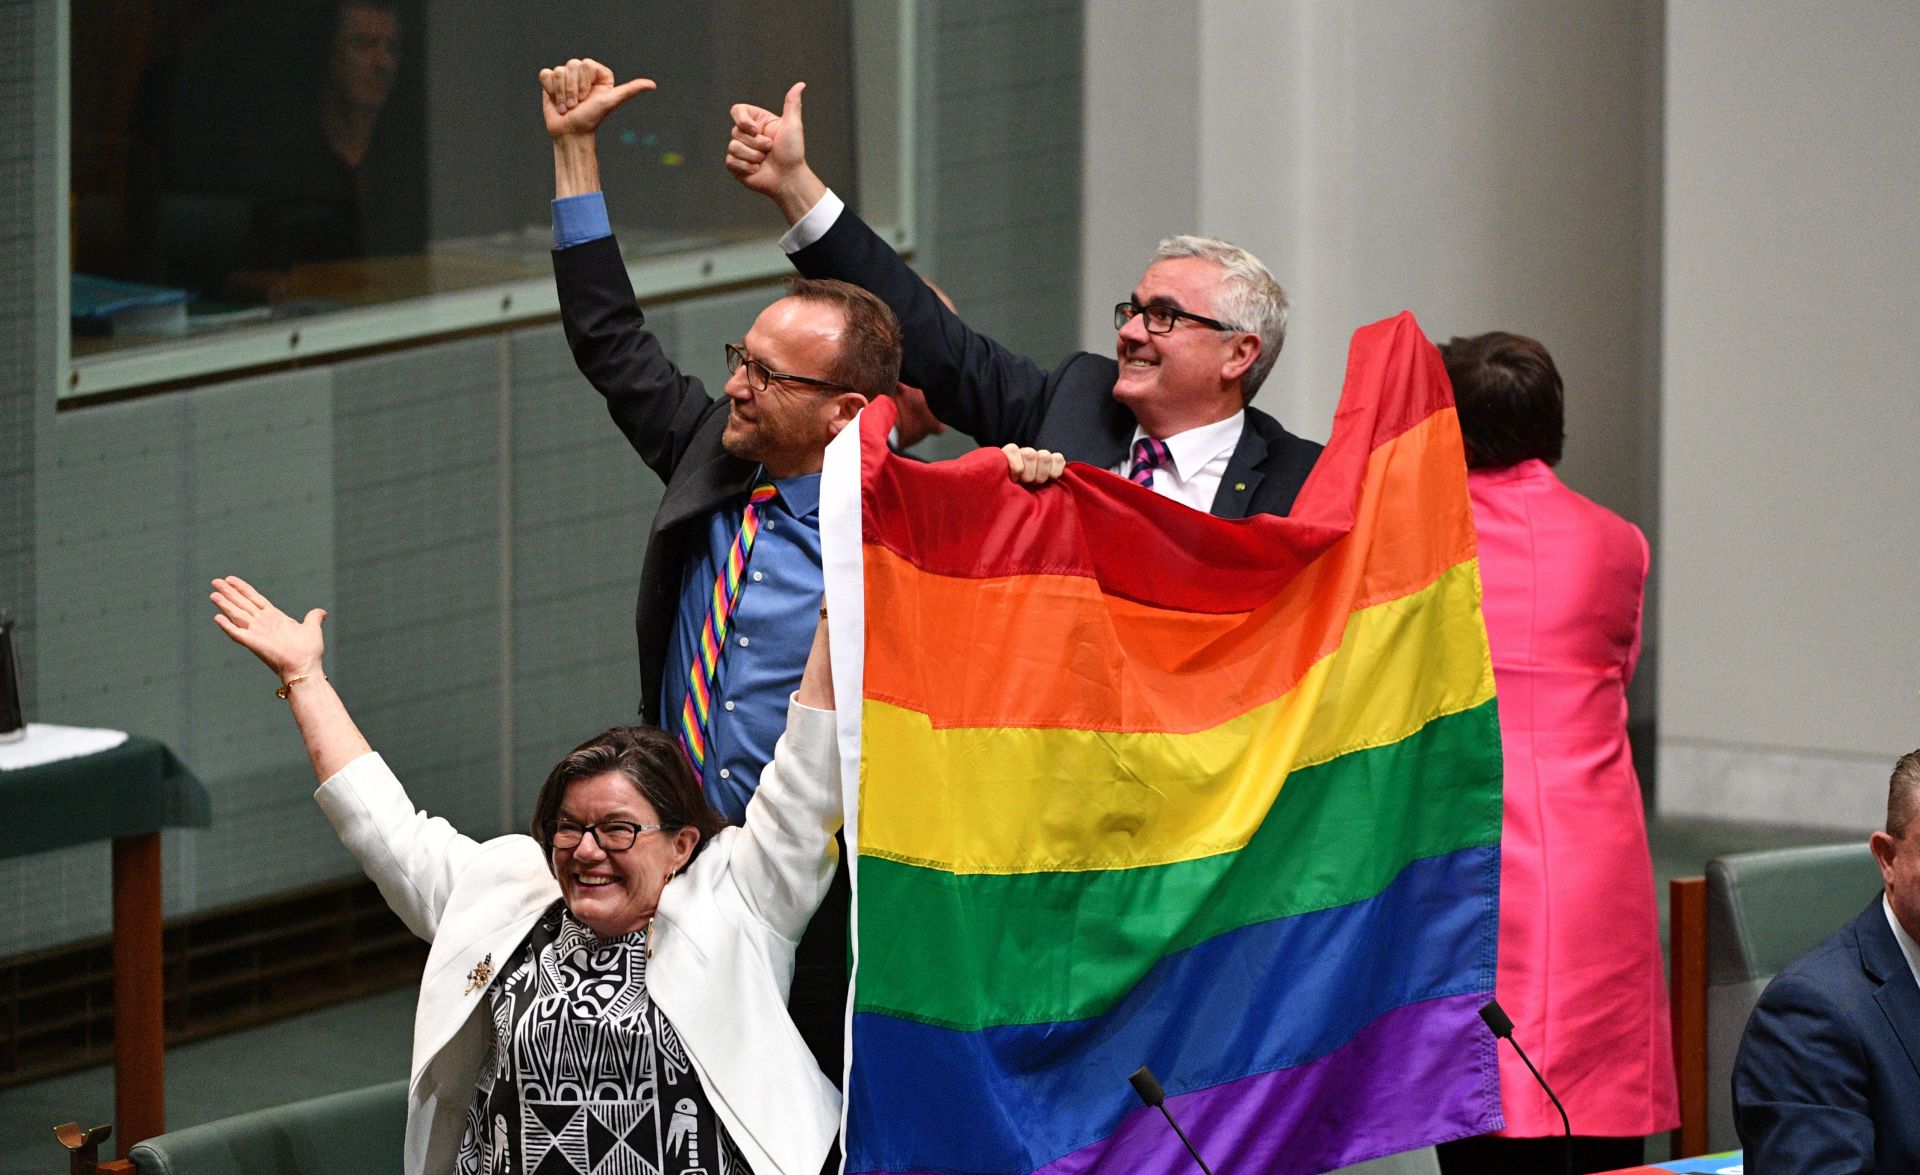 epa06373156 MPs Cathy McGowan (L), Adam Brandt (C) and Andrew Wilkie (R) celebrate the passing of the Marriage Amendment Bill in the House of Representatives at Parliament House in Canberra, Australia, 07 December 2017. The passage of the bill effectively legalizes same-sex marriage in Australia.  EPA/MICK TSIKAS  AUSTRALIA AND NEW ZEALAND OUT